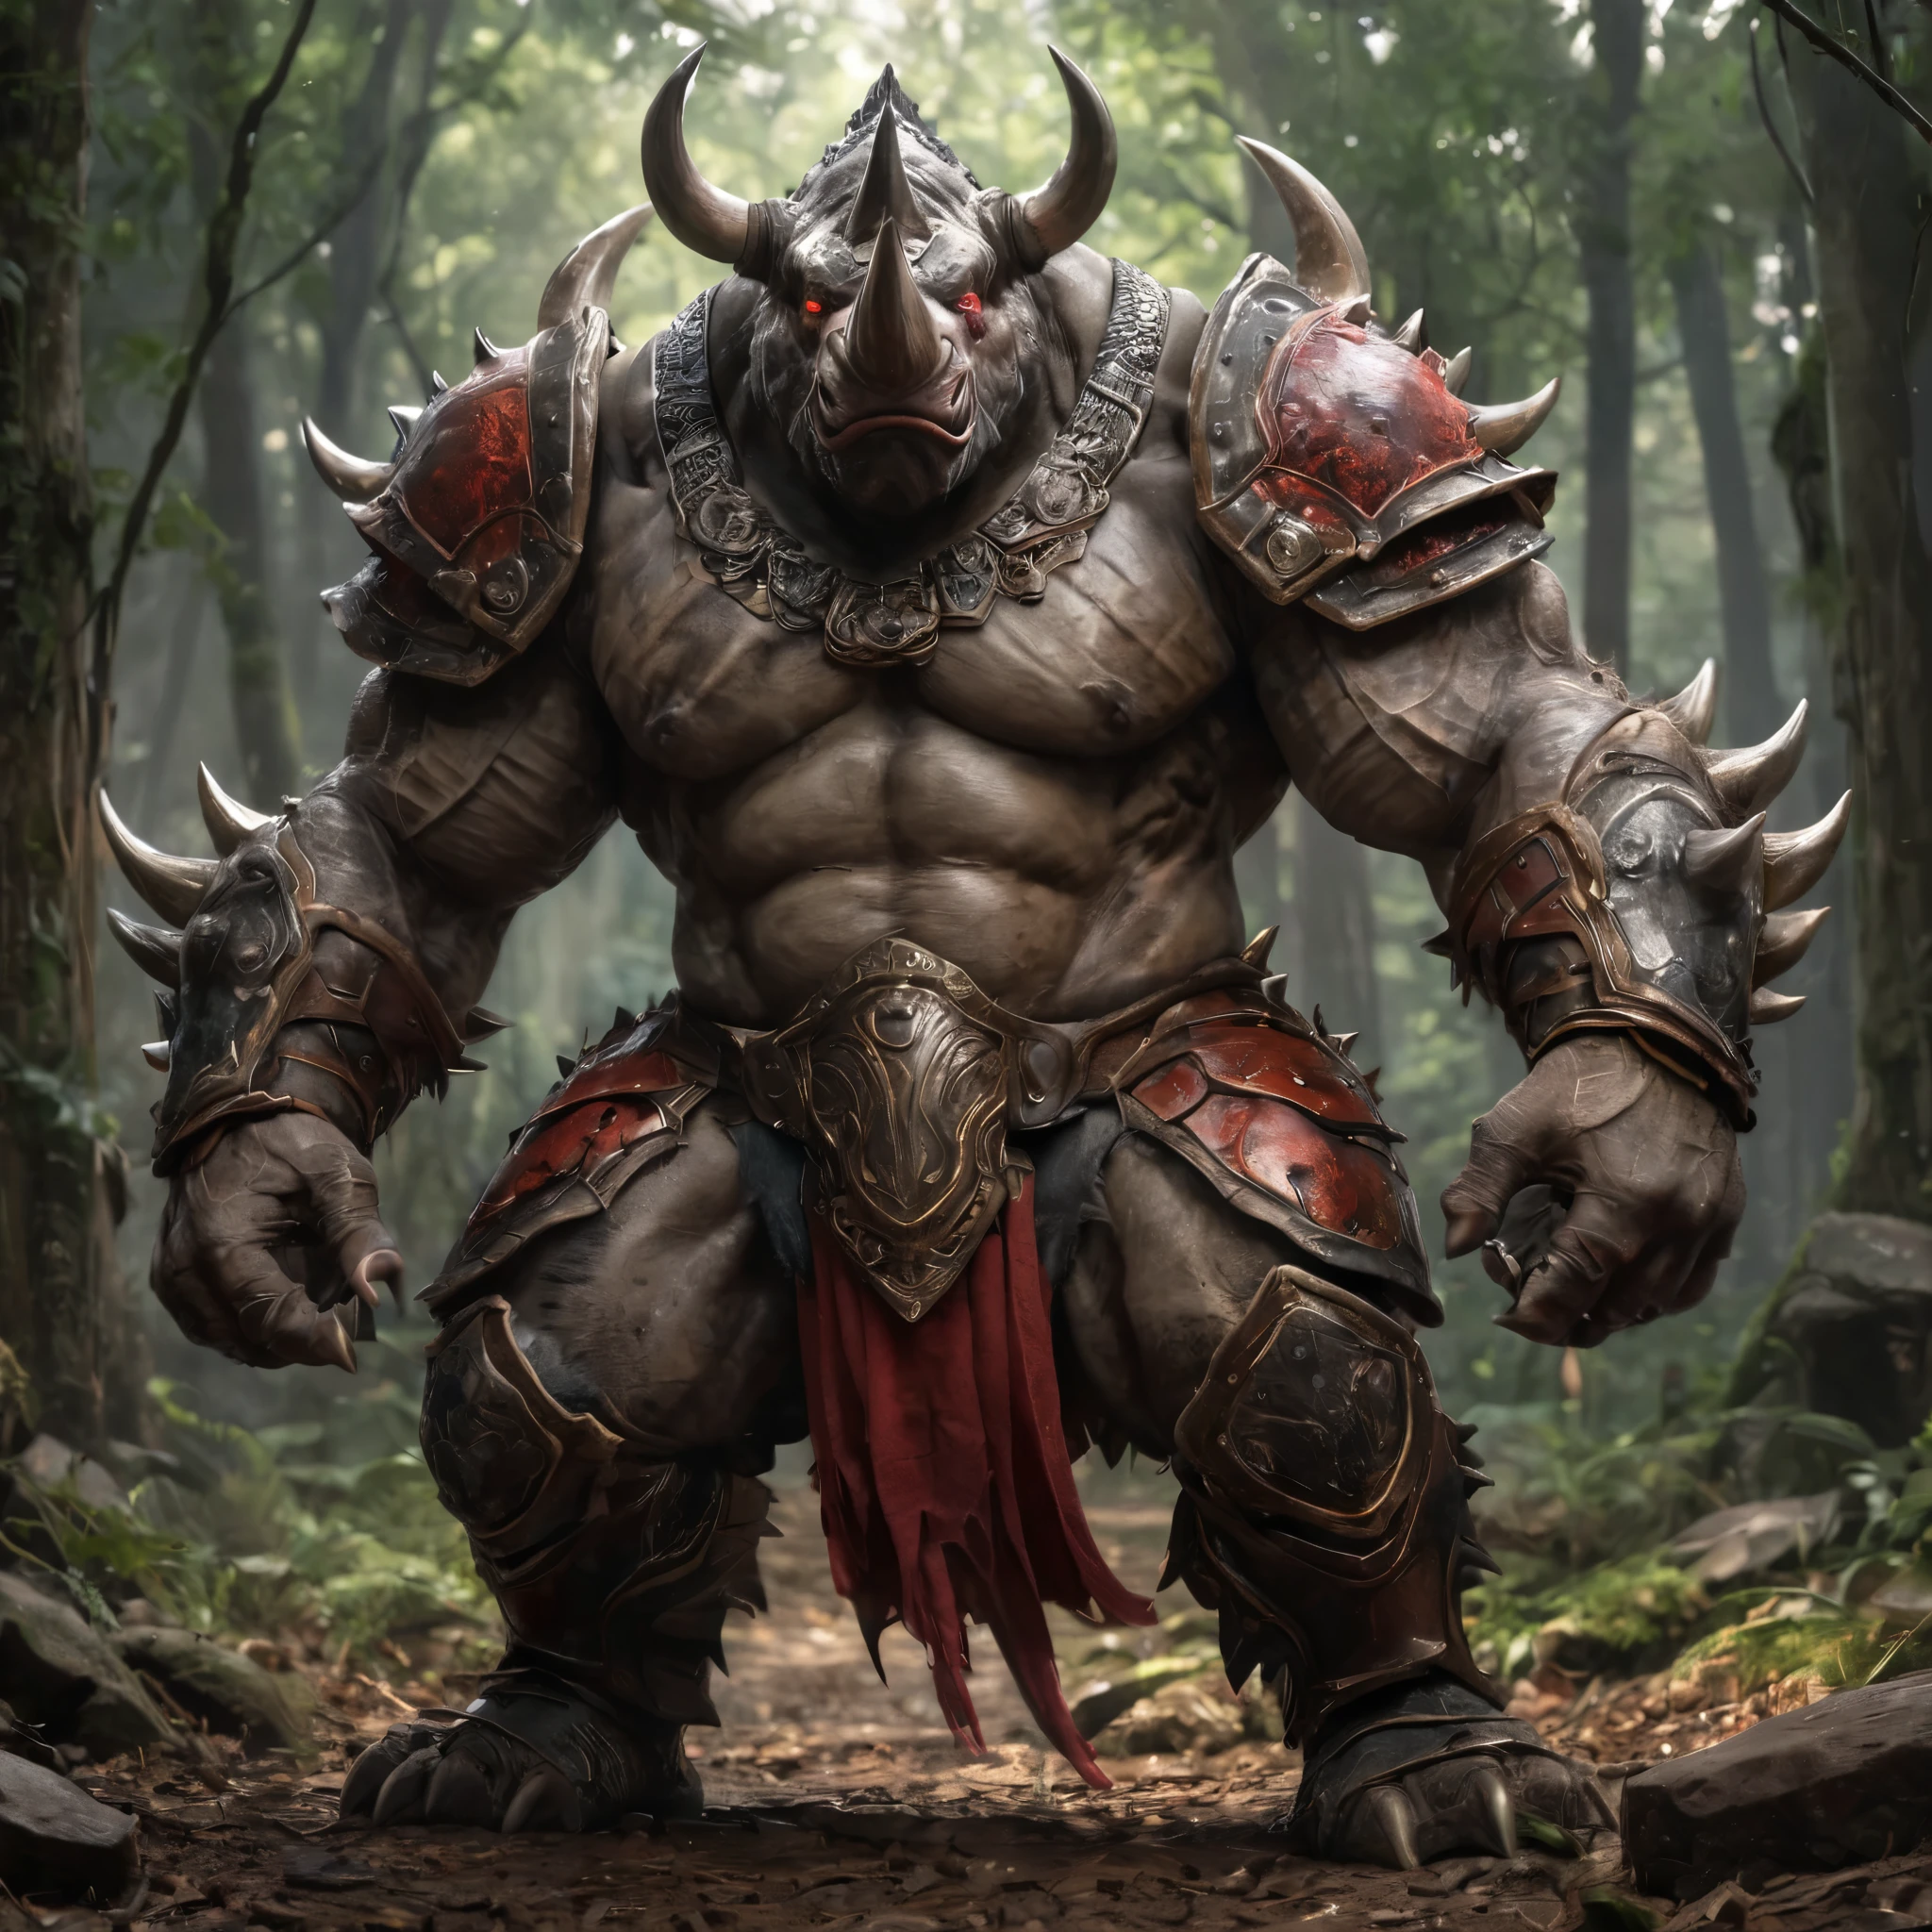 Two headed rhino monstrous behemoth beast warrior,duo great axe,spiked scalemail,gargantuan d&d sized monstrosity,strong,towering,huge,ferocious,terrifying,beasts,mythical,strong arms,bulging muscles,fierce expression,glowing red eyes,Fantasy,creature,battle-ready,body armor,muscular, menacing presence,overwhelming power,destructive force,ancient,legendary,clairvoyant,legendary,roaring with fury,giant horn,indomitable,enduring,unstoppable,legendary protector,divine strength,rampaging,unleashed,unyielding,majestic,savage power,bloodthirsty,immense power,monstrous strength,undefeatable, larger than life (best quality,4k,8k,highres,masterpiece:1.2),ultra-detailed,(realistic,photorealistic,photo-realistic:1.37), HDR,UHD,studio lighting,ultra-fine painting,sharp focus,physically-based rendering,extreme detail description,professional,vivid colors,bokeh,concept artist.